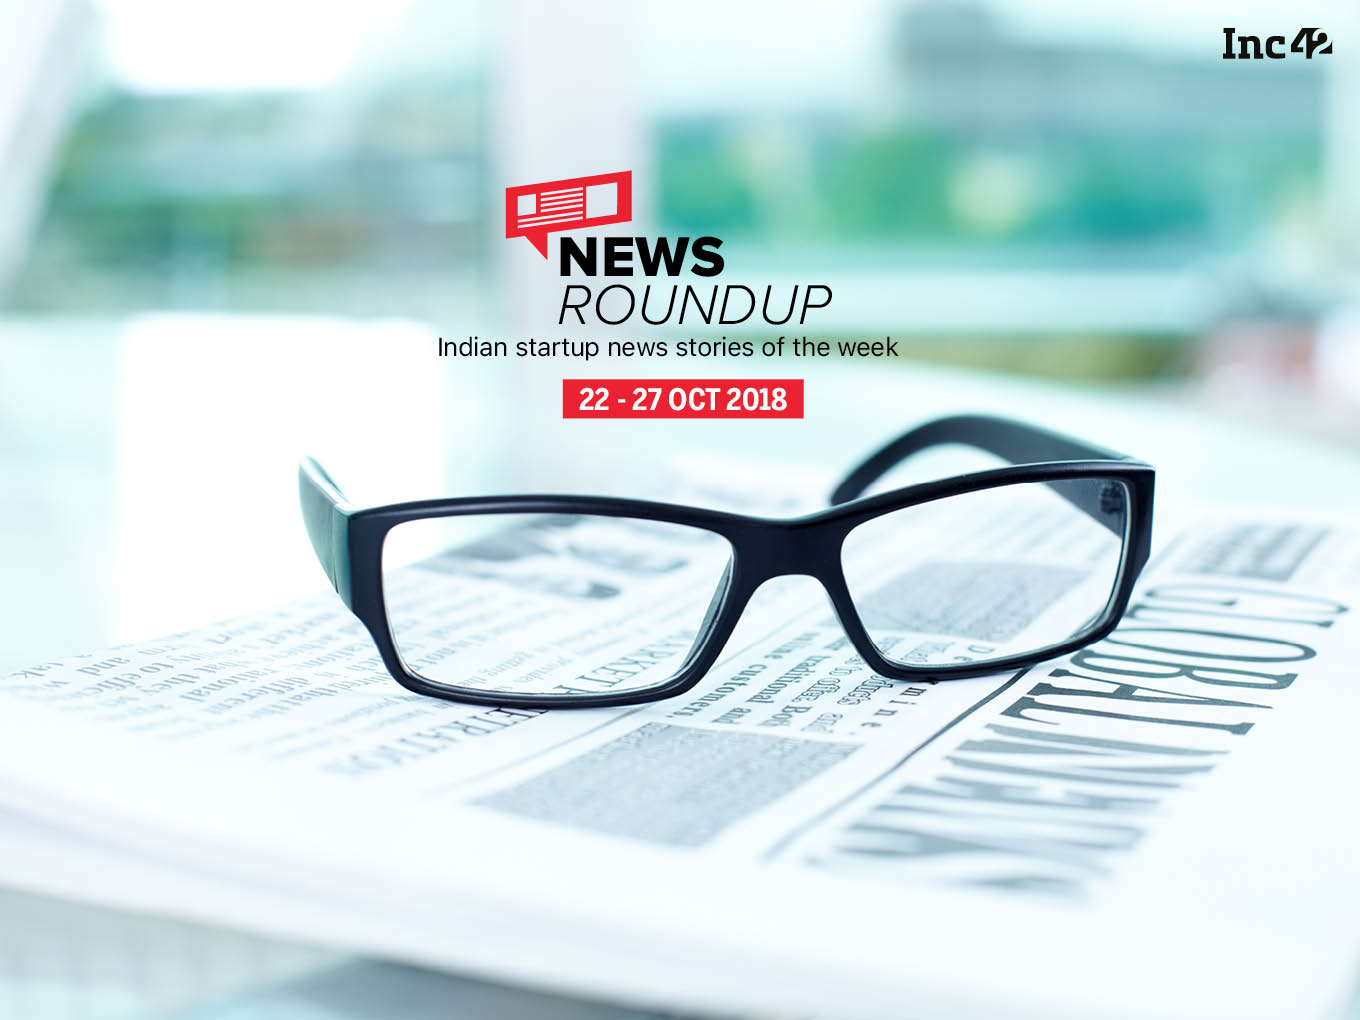 News Roundup: 11 Indian Startup News Stories That You Don’t Want To Miss This Week [22-27 October]